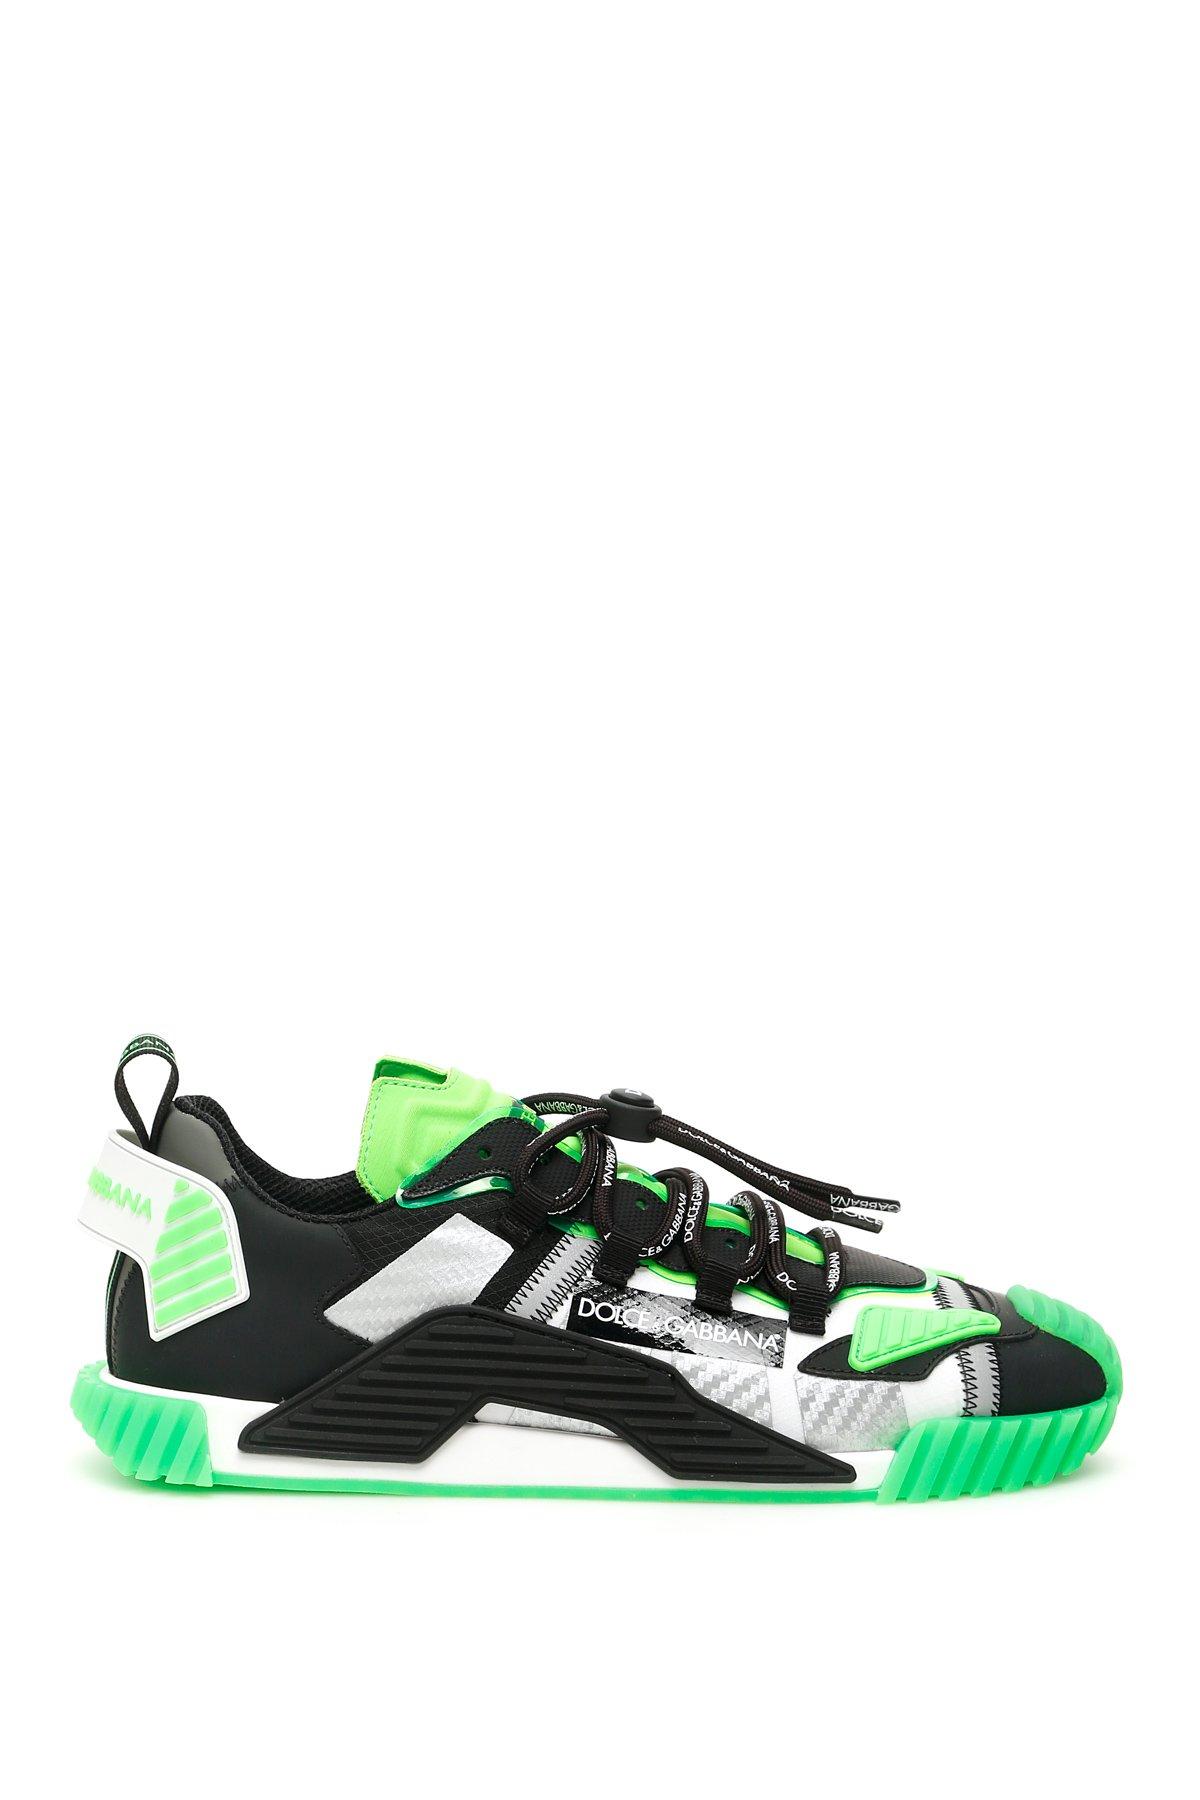 Dolce & Gabbana Ns1 Sneakers In Mixed Materials in Green for Men | Lyst